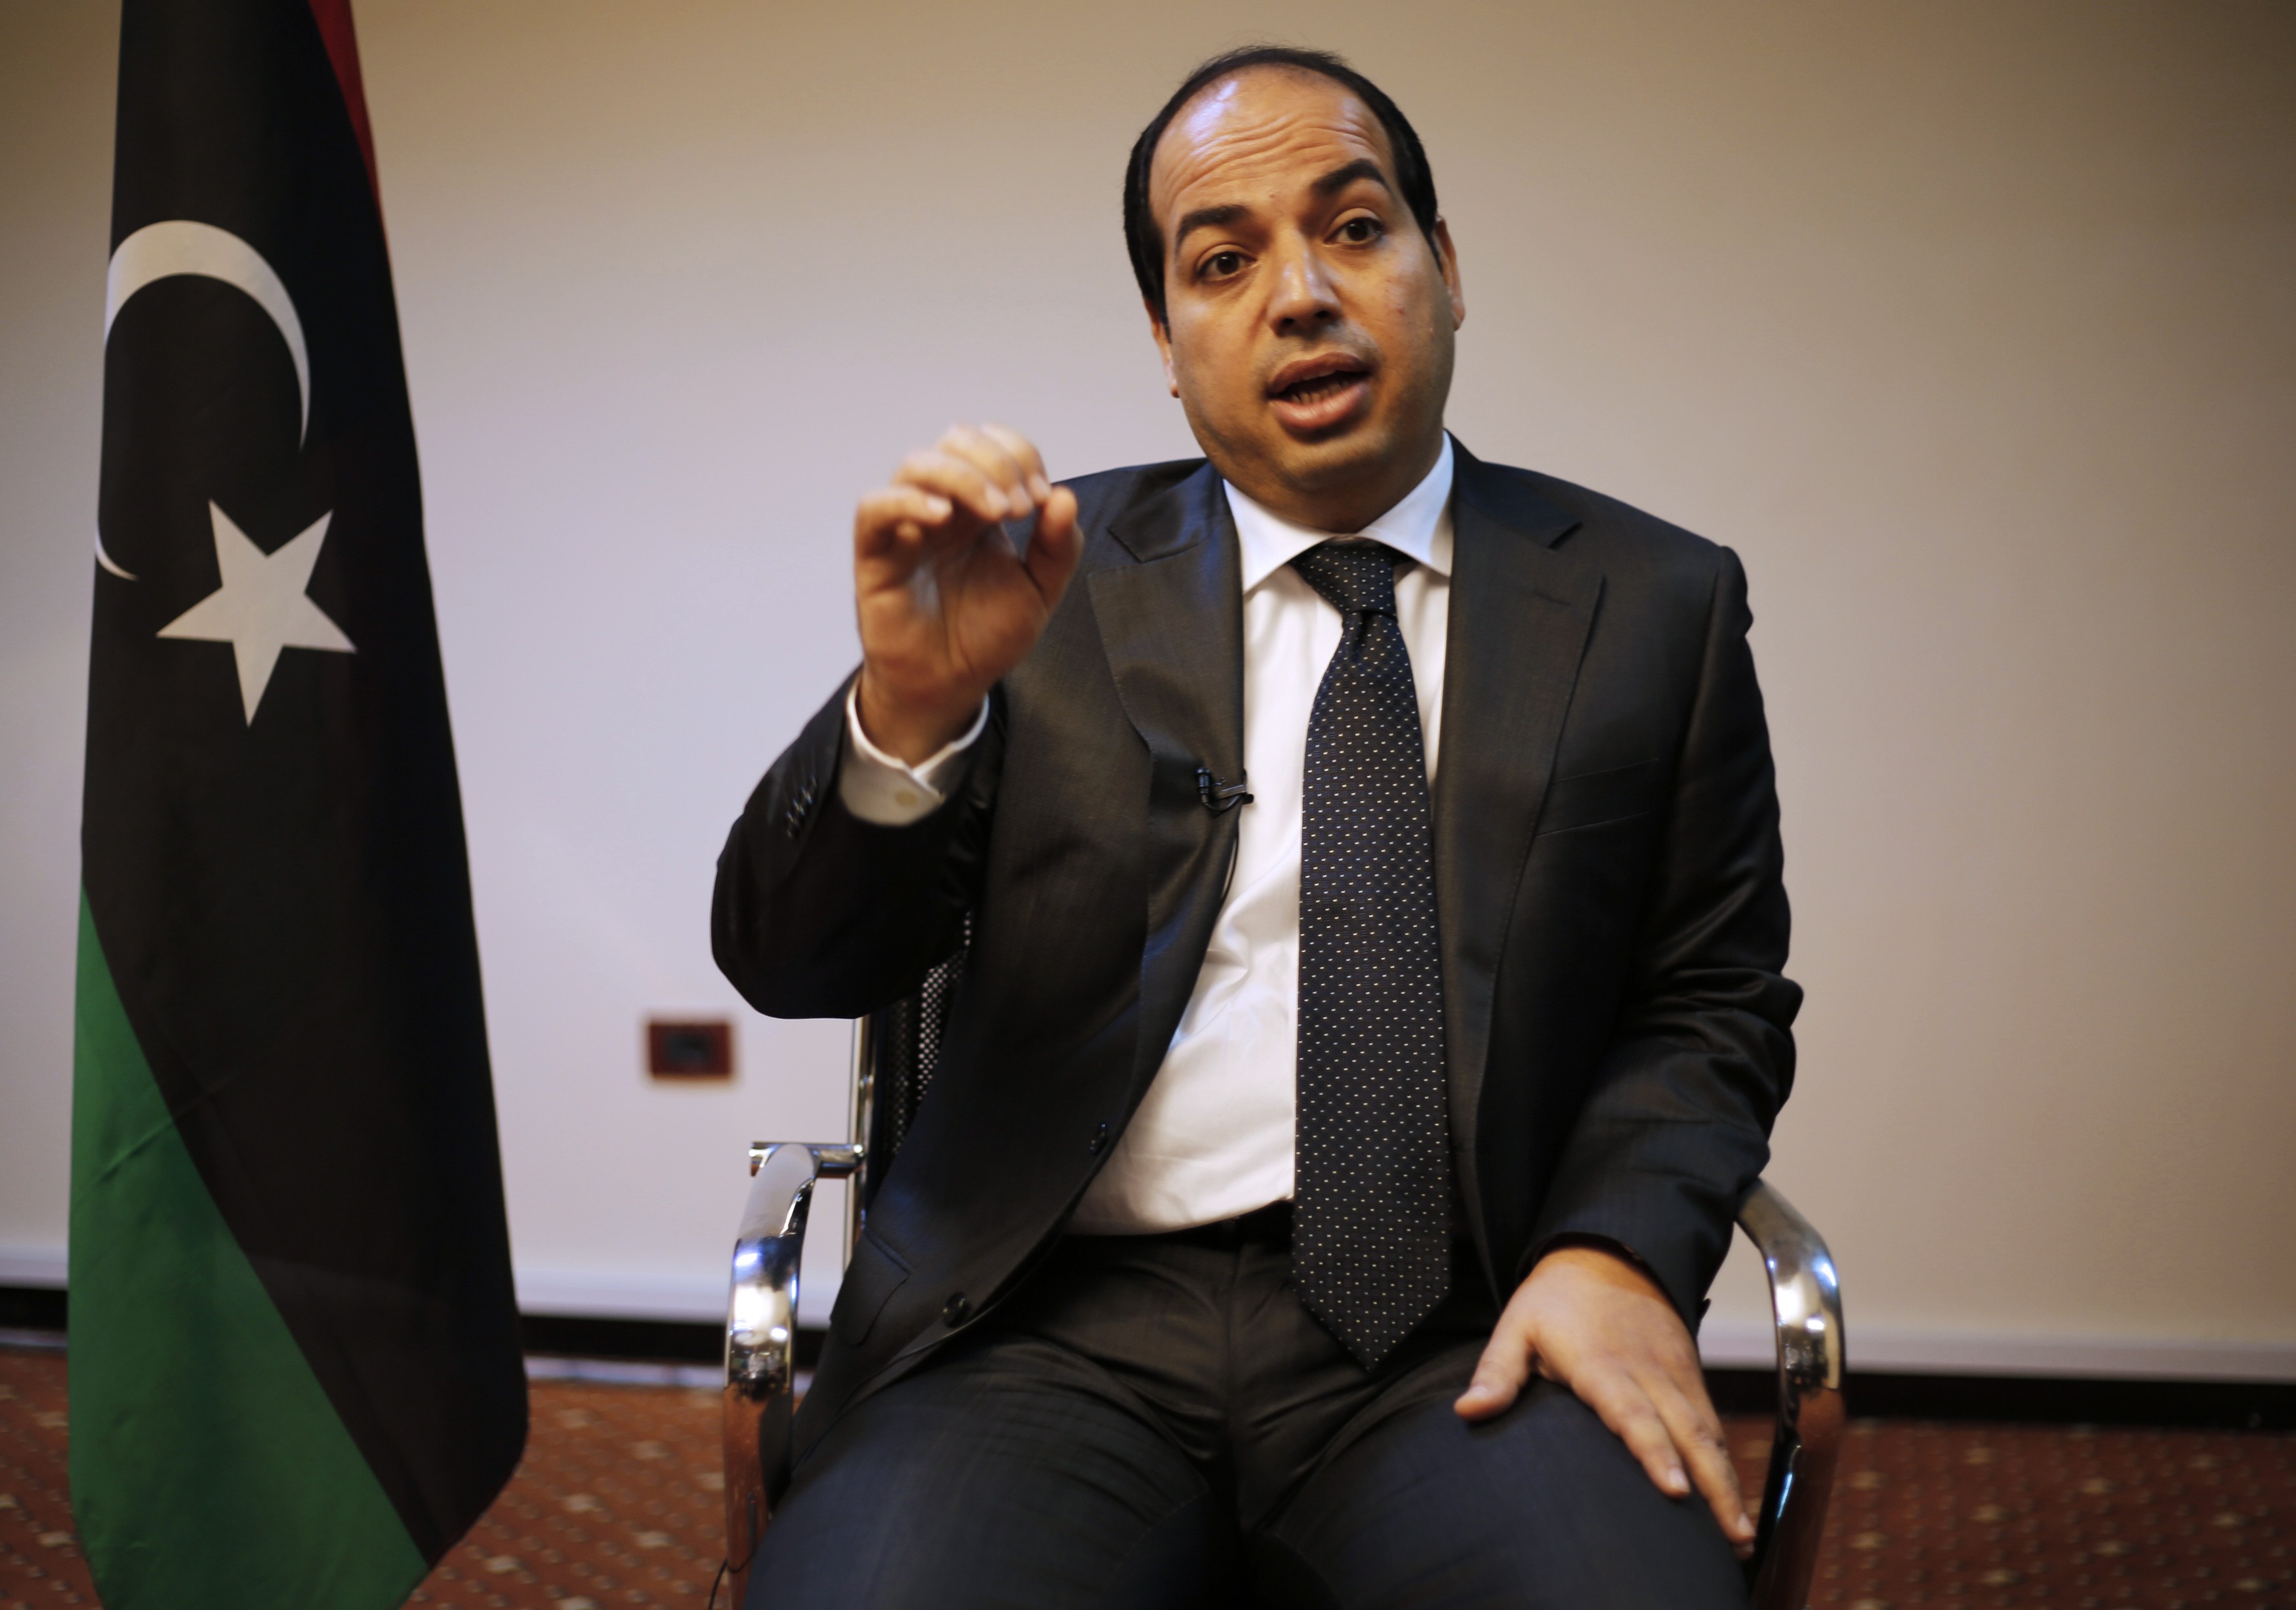 Libya's new Prime Minister Ahmed Maiteeq talks during an interview with Reuters journalists in Tripoli May 26, 2014. Libya's new premier said on Monday his government will focus on fighting militants, securing borders and strengthening the military with t